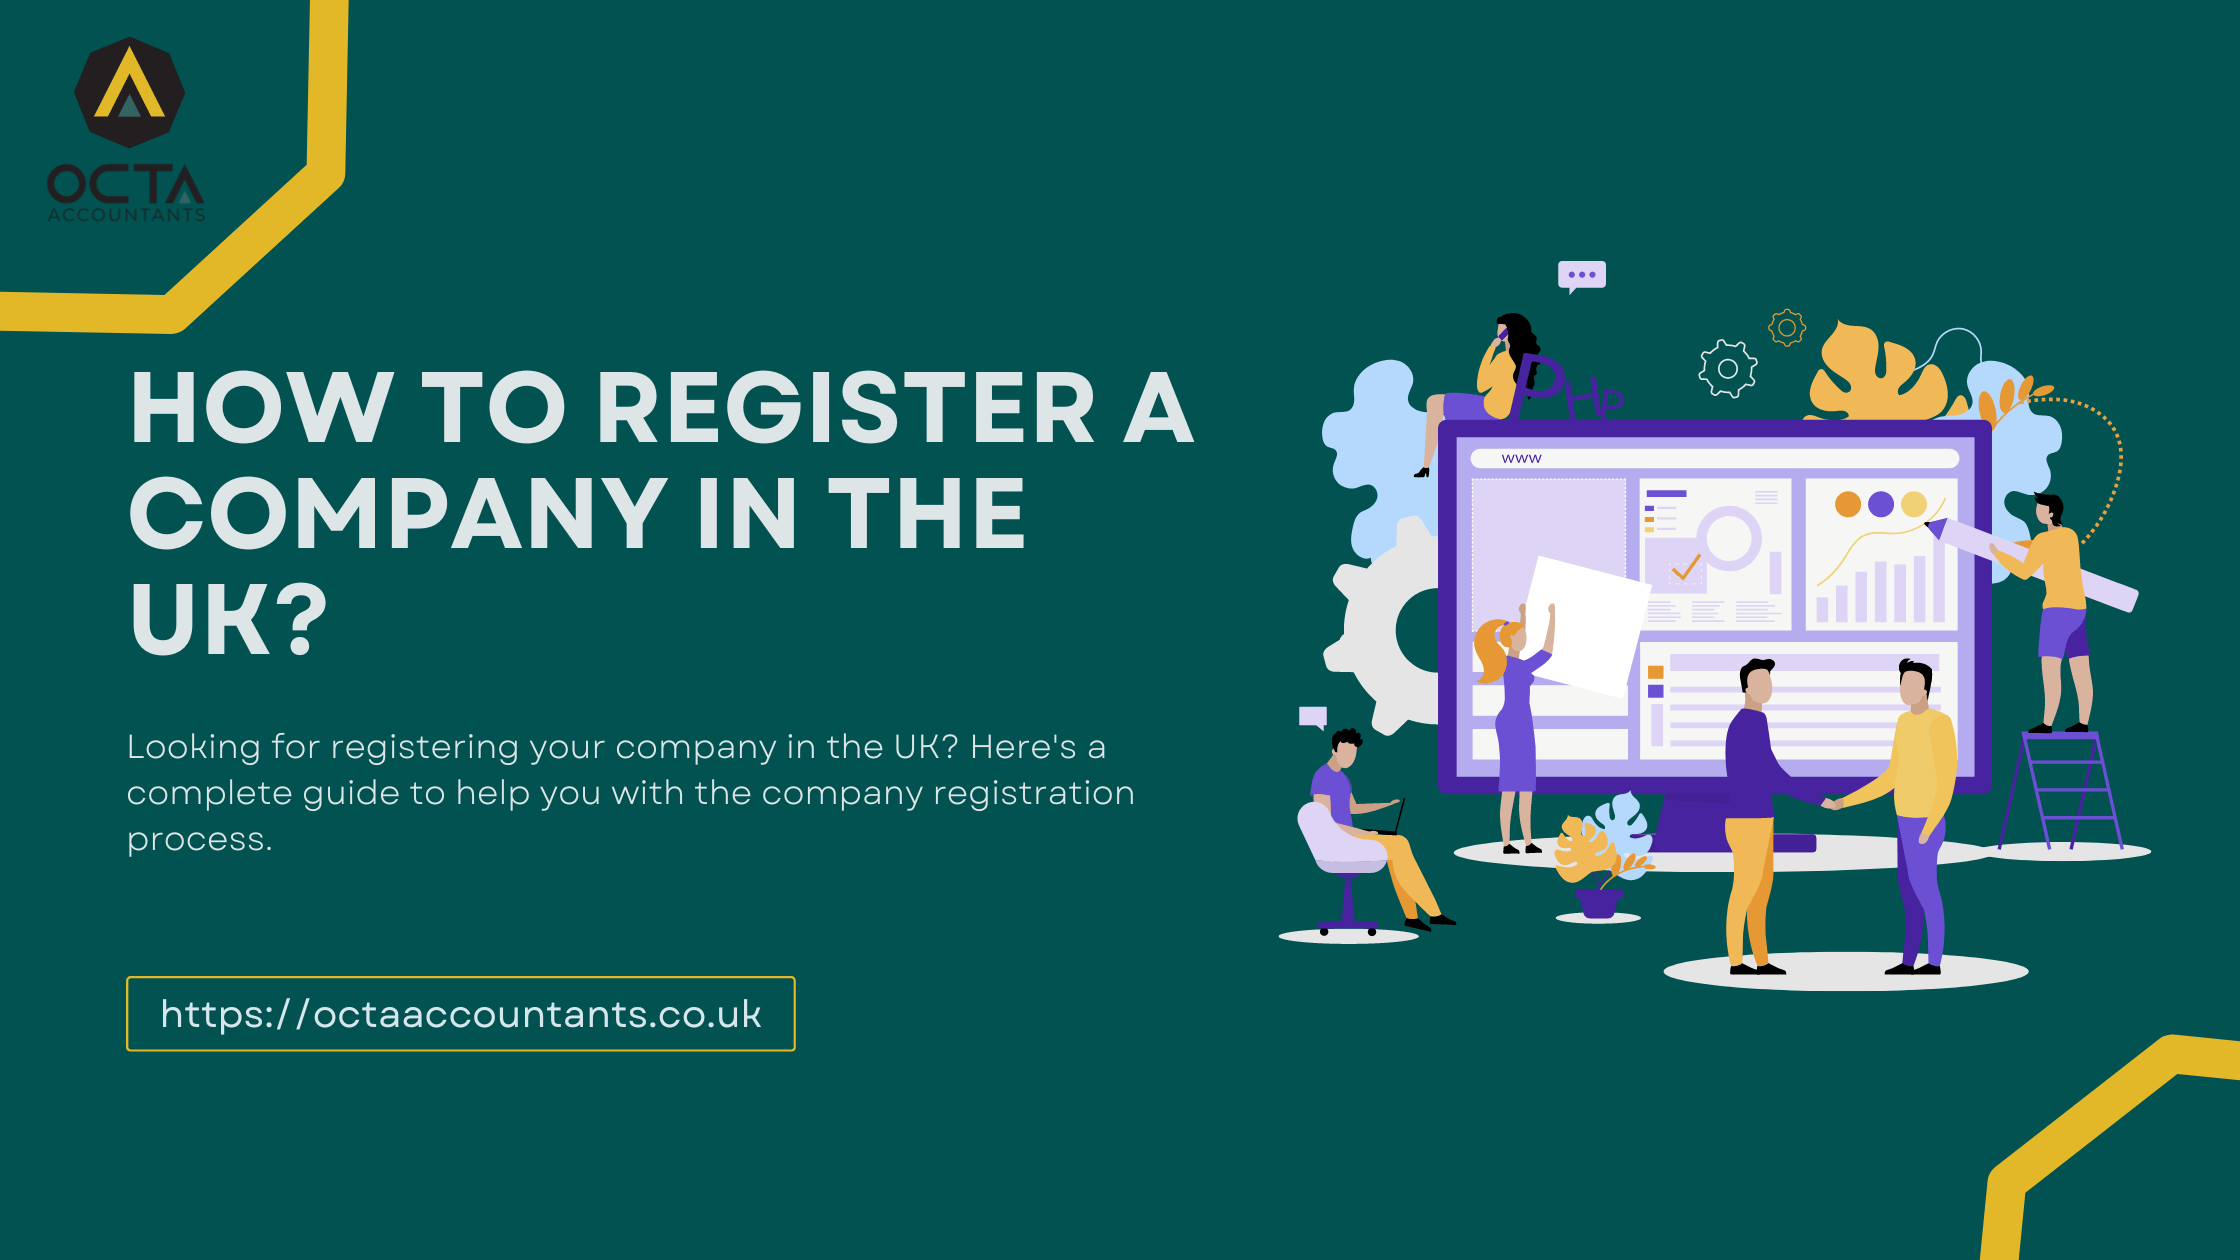 How To Register a Company in the UK?